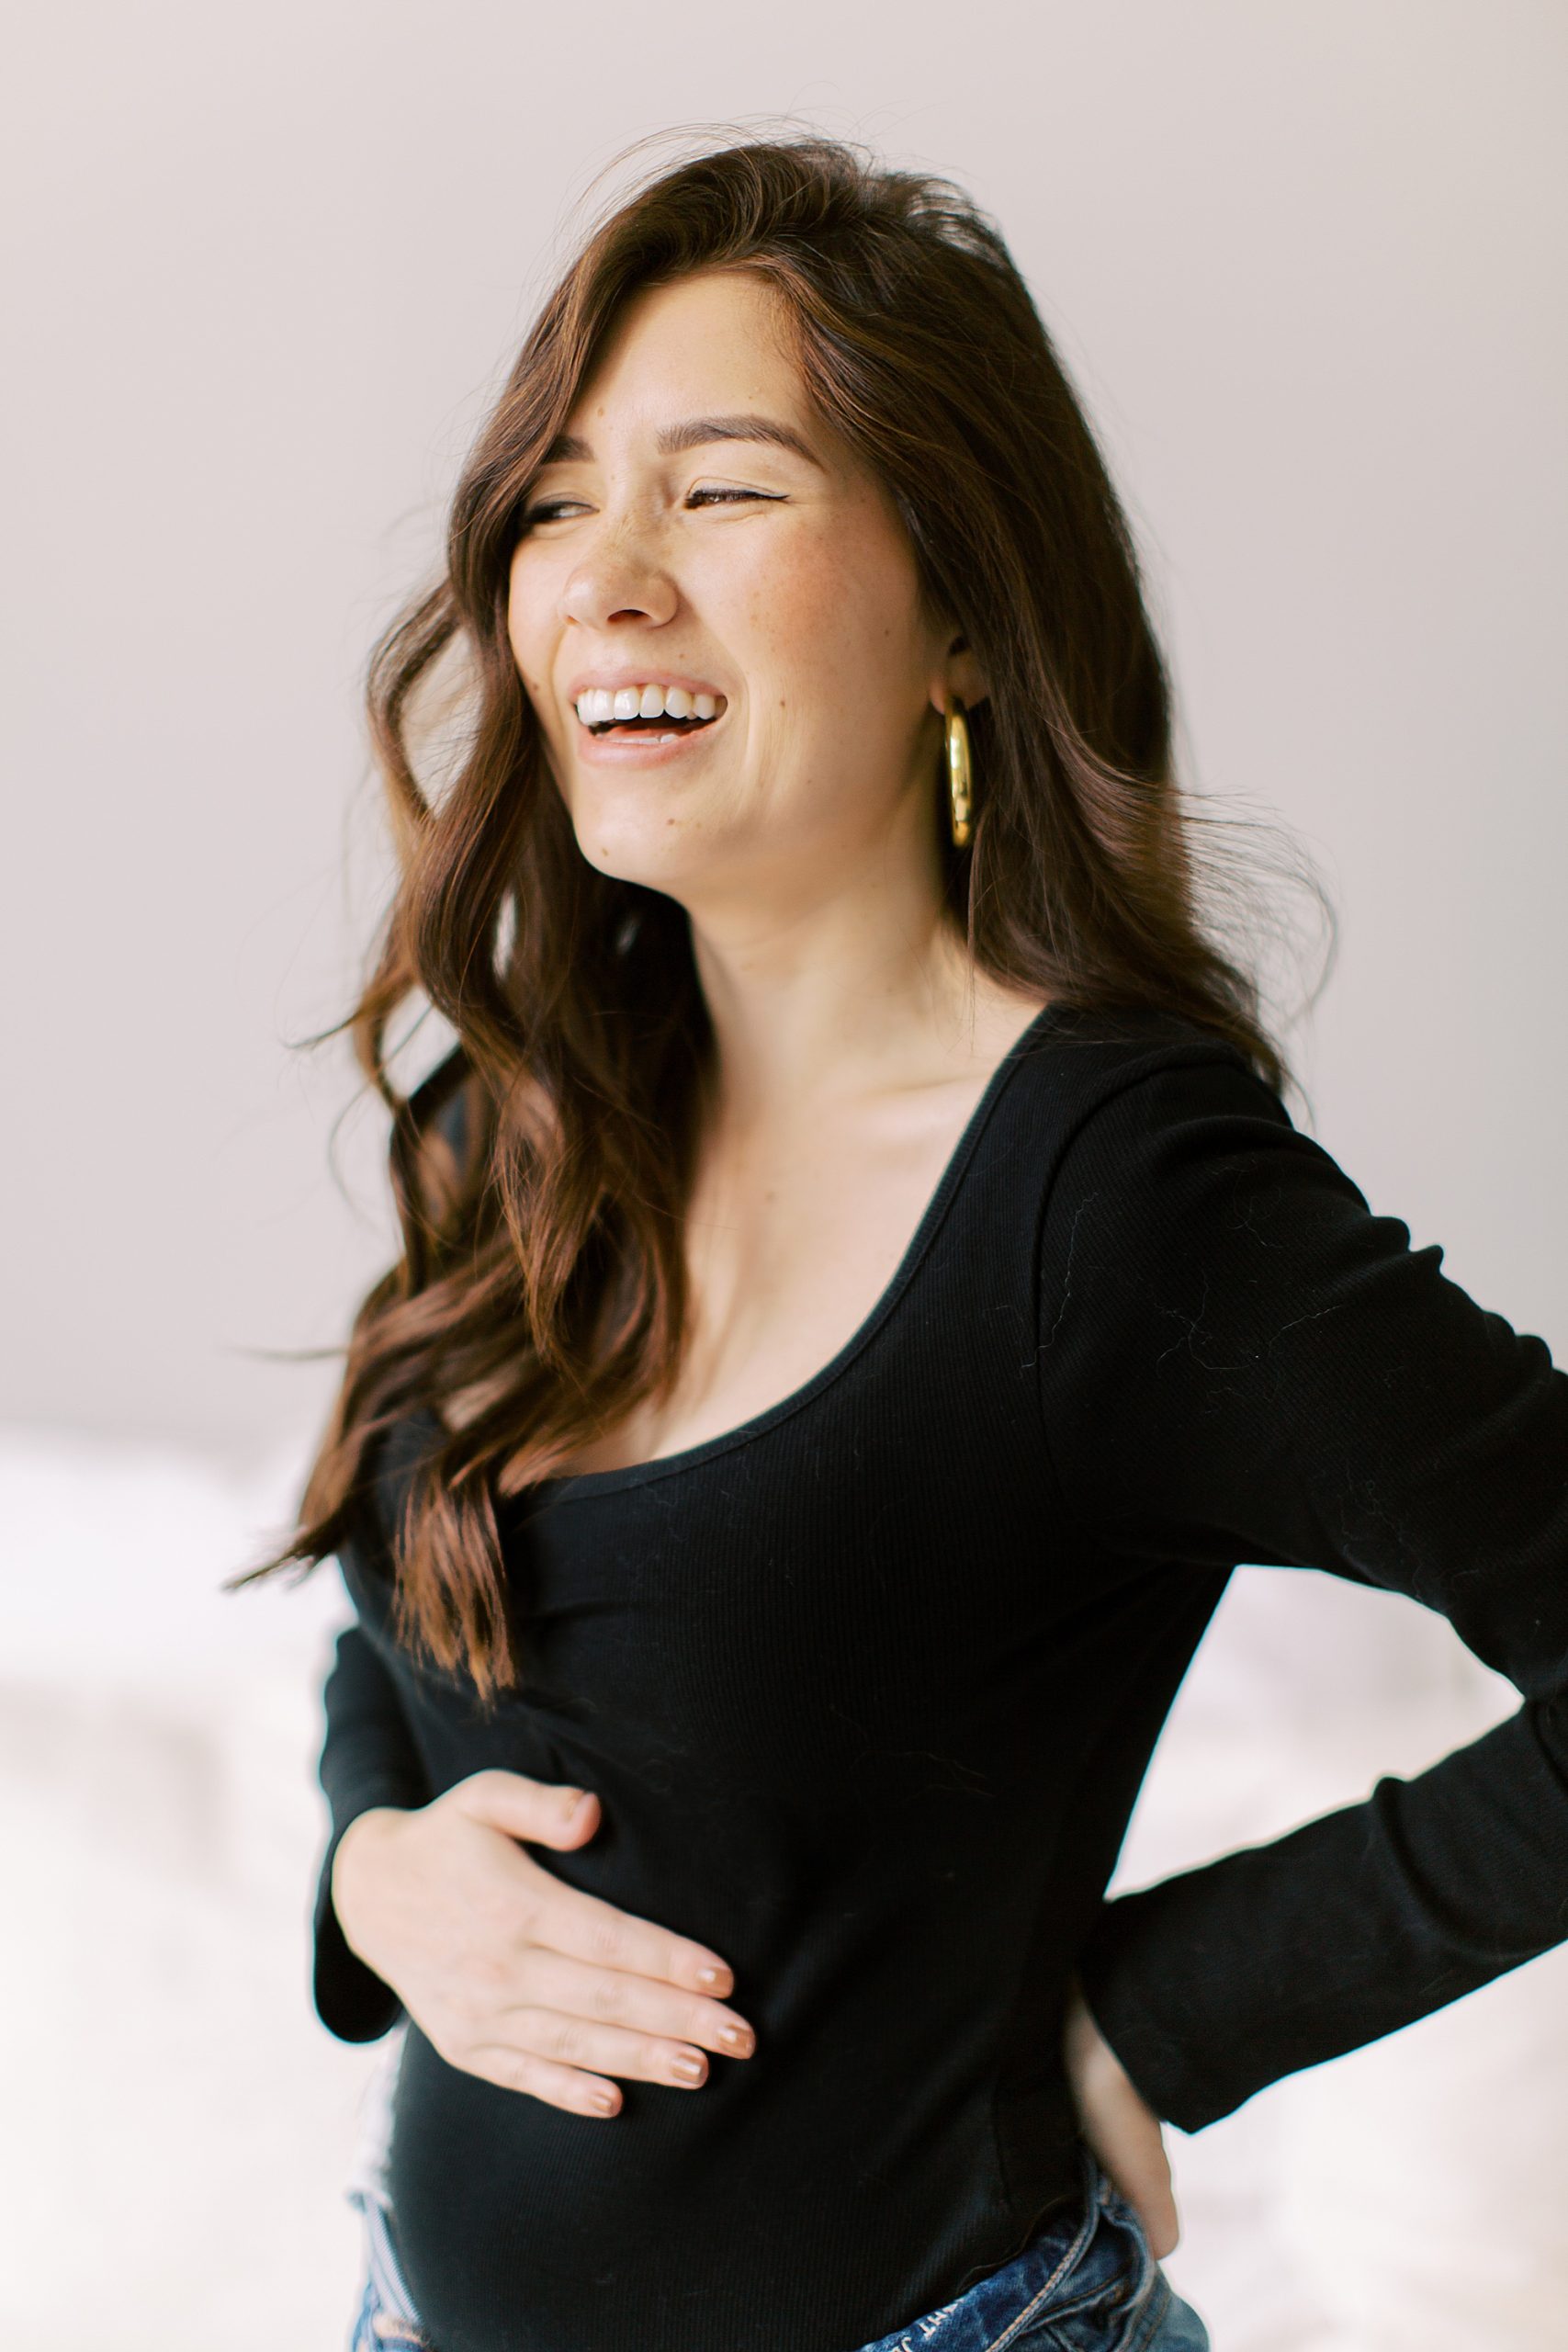 woman laughs holding belly during pregnancy announcement